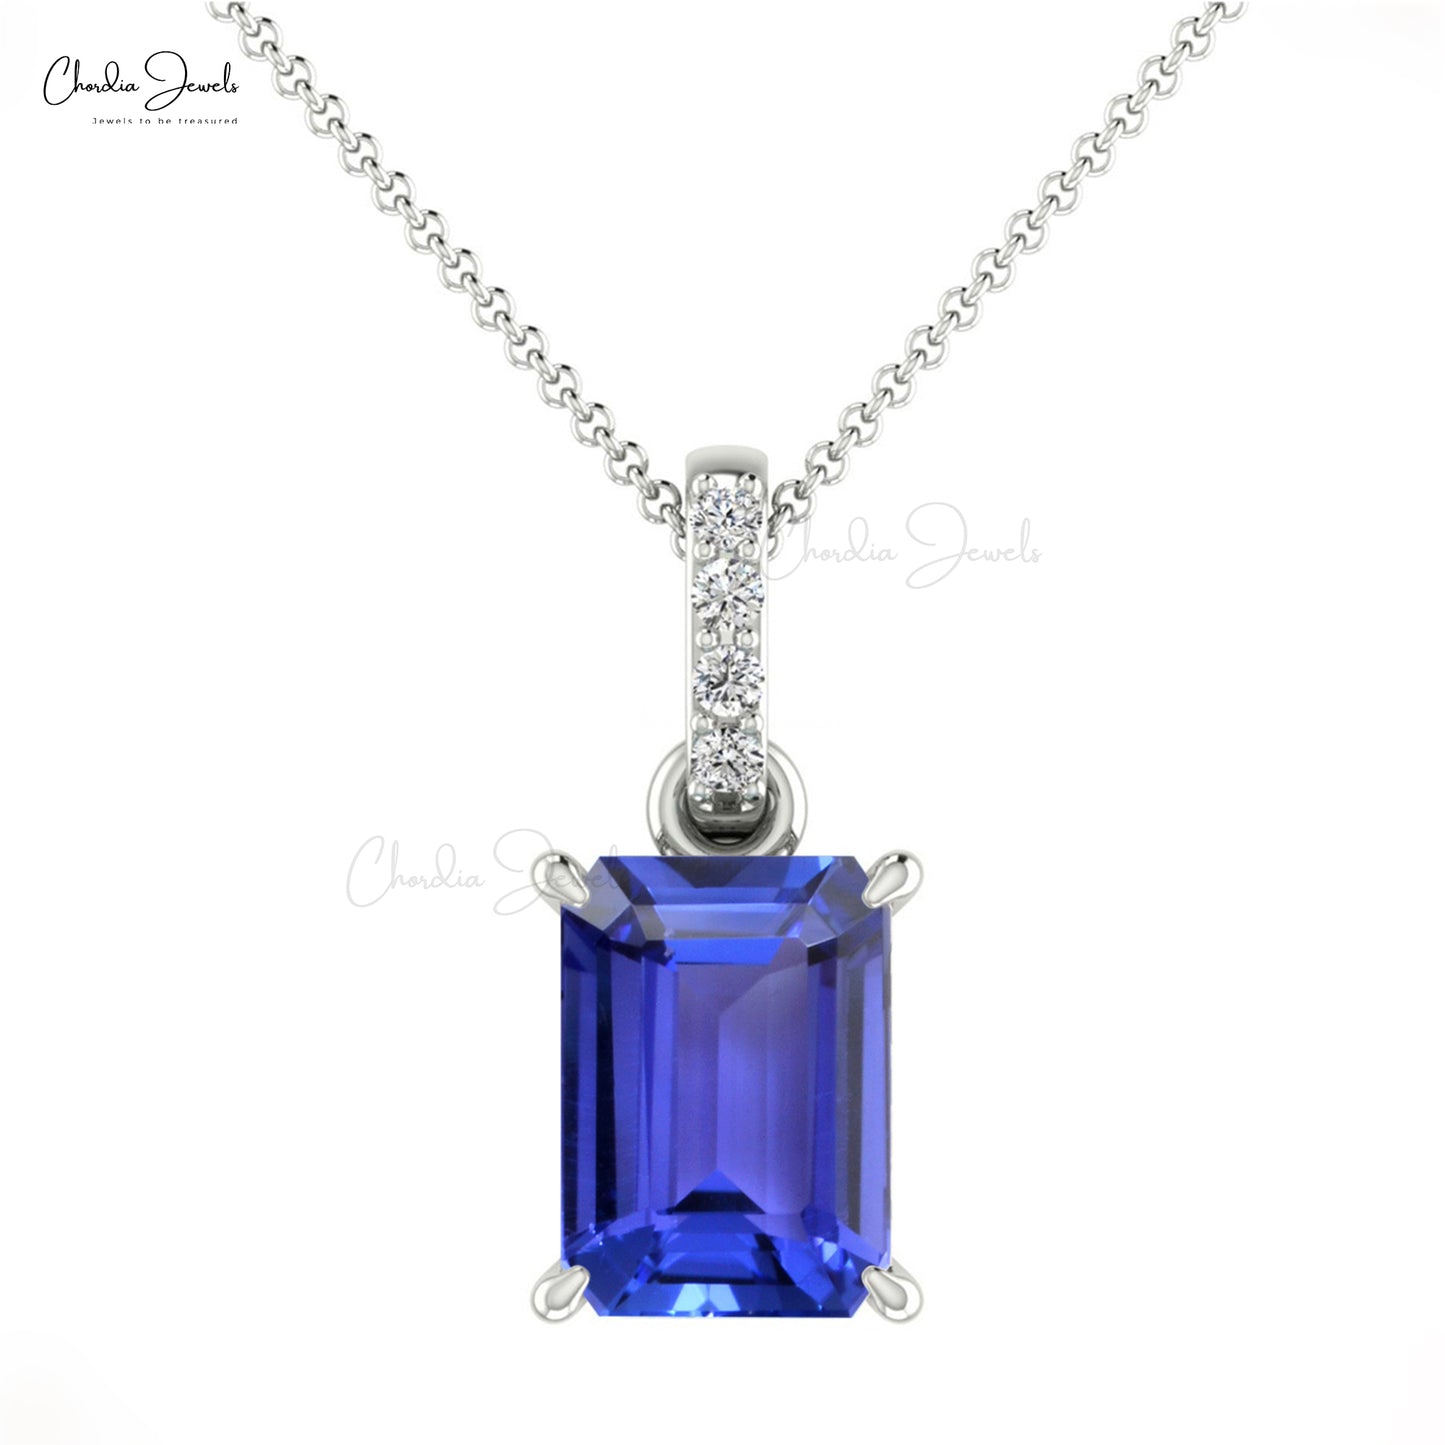 Classic Handmade Natural White Diamond Dangling Pendant 7x5mm Octagon Tanzanite Gemstone Pendant Necklace 14k Pure Gold Jewelry For Her